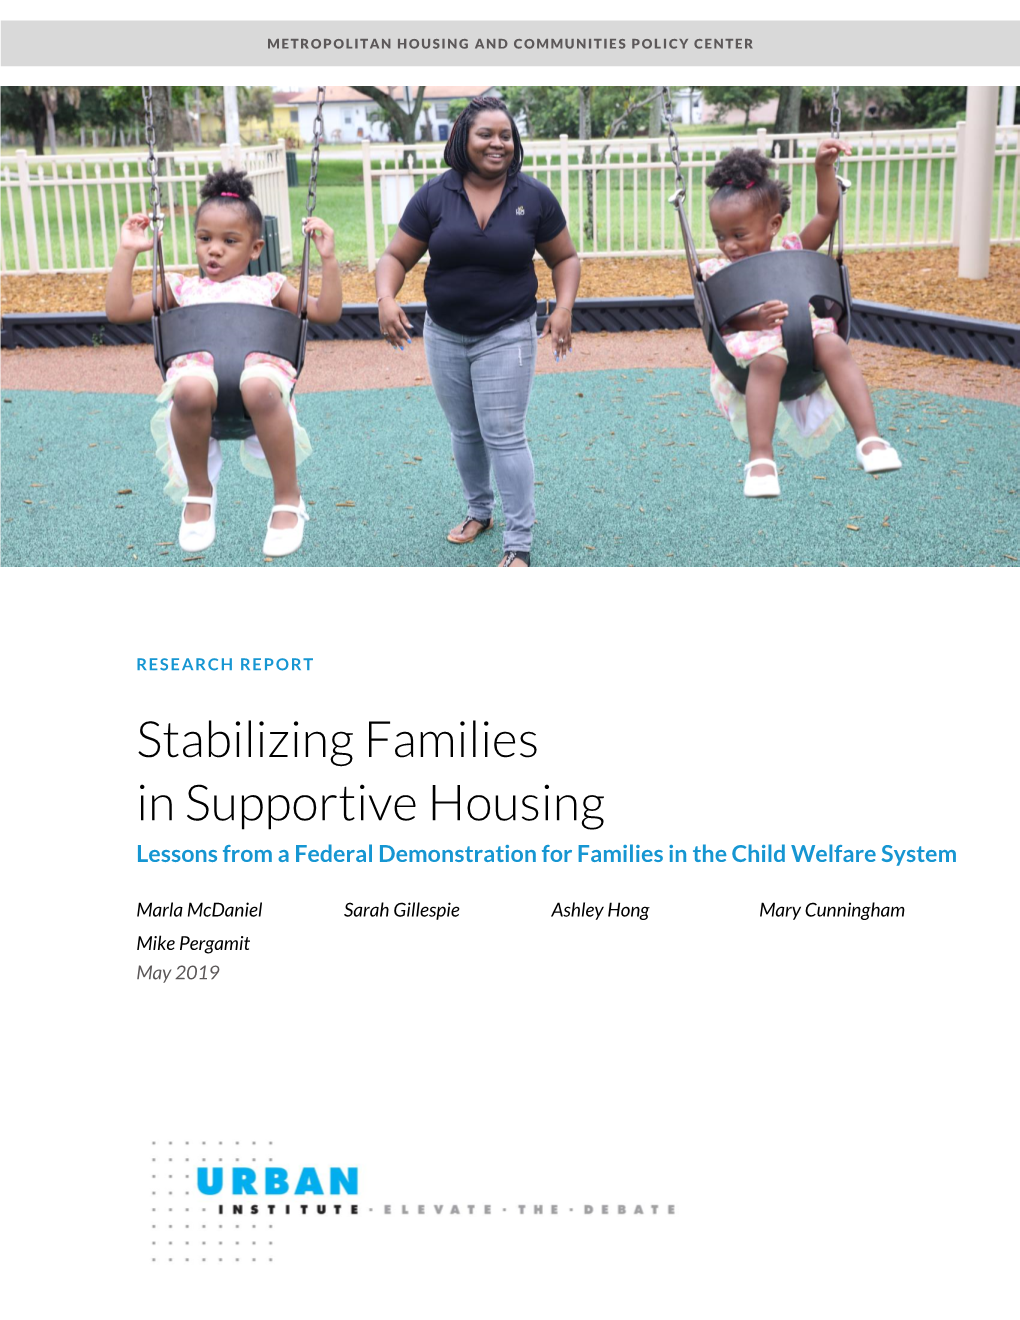 Stabilizing Families in Supportive Housing Lessons from a Federal Demonstration for Families in the Child Welfare System